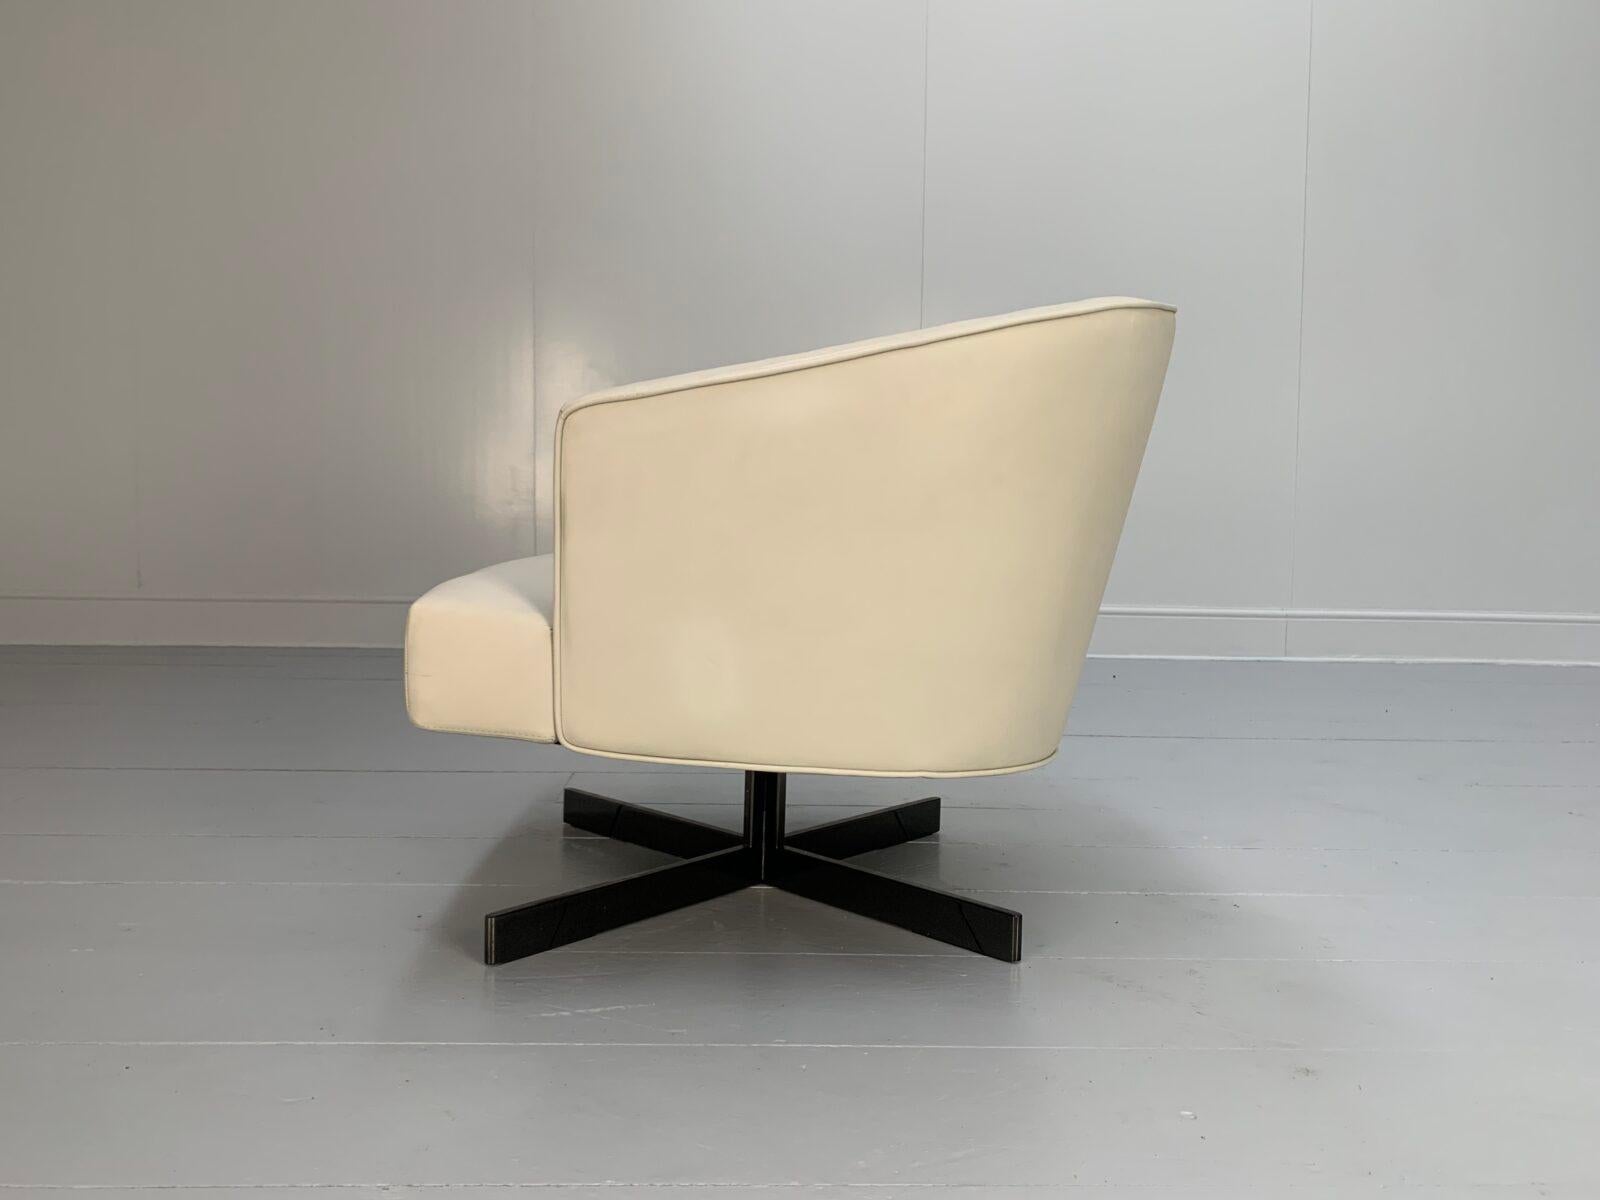 Minotti “Martin” Armchair – In Ivory “Pelle” Leather In Good Condition For Sale In Barrowford, GB